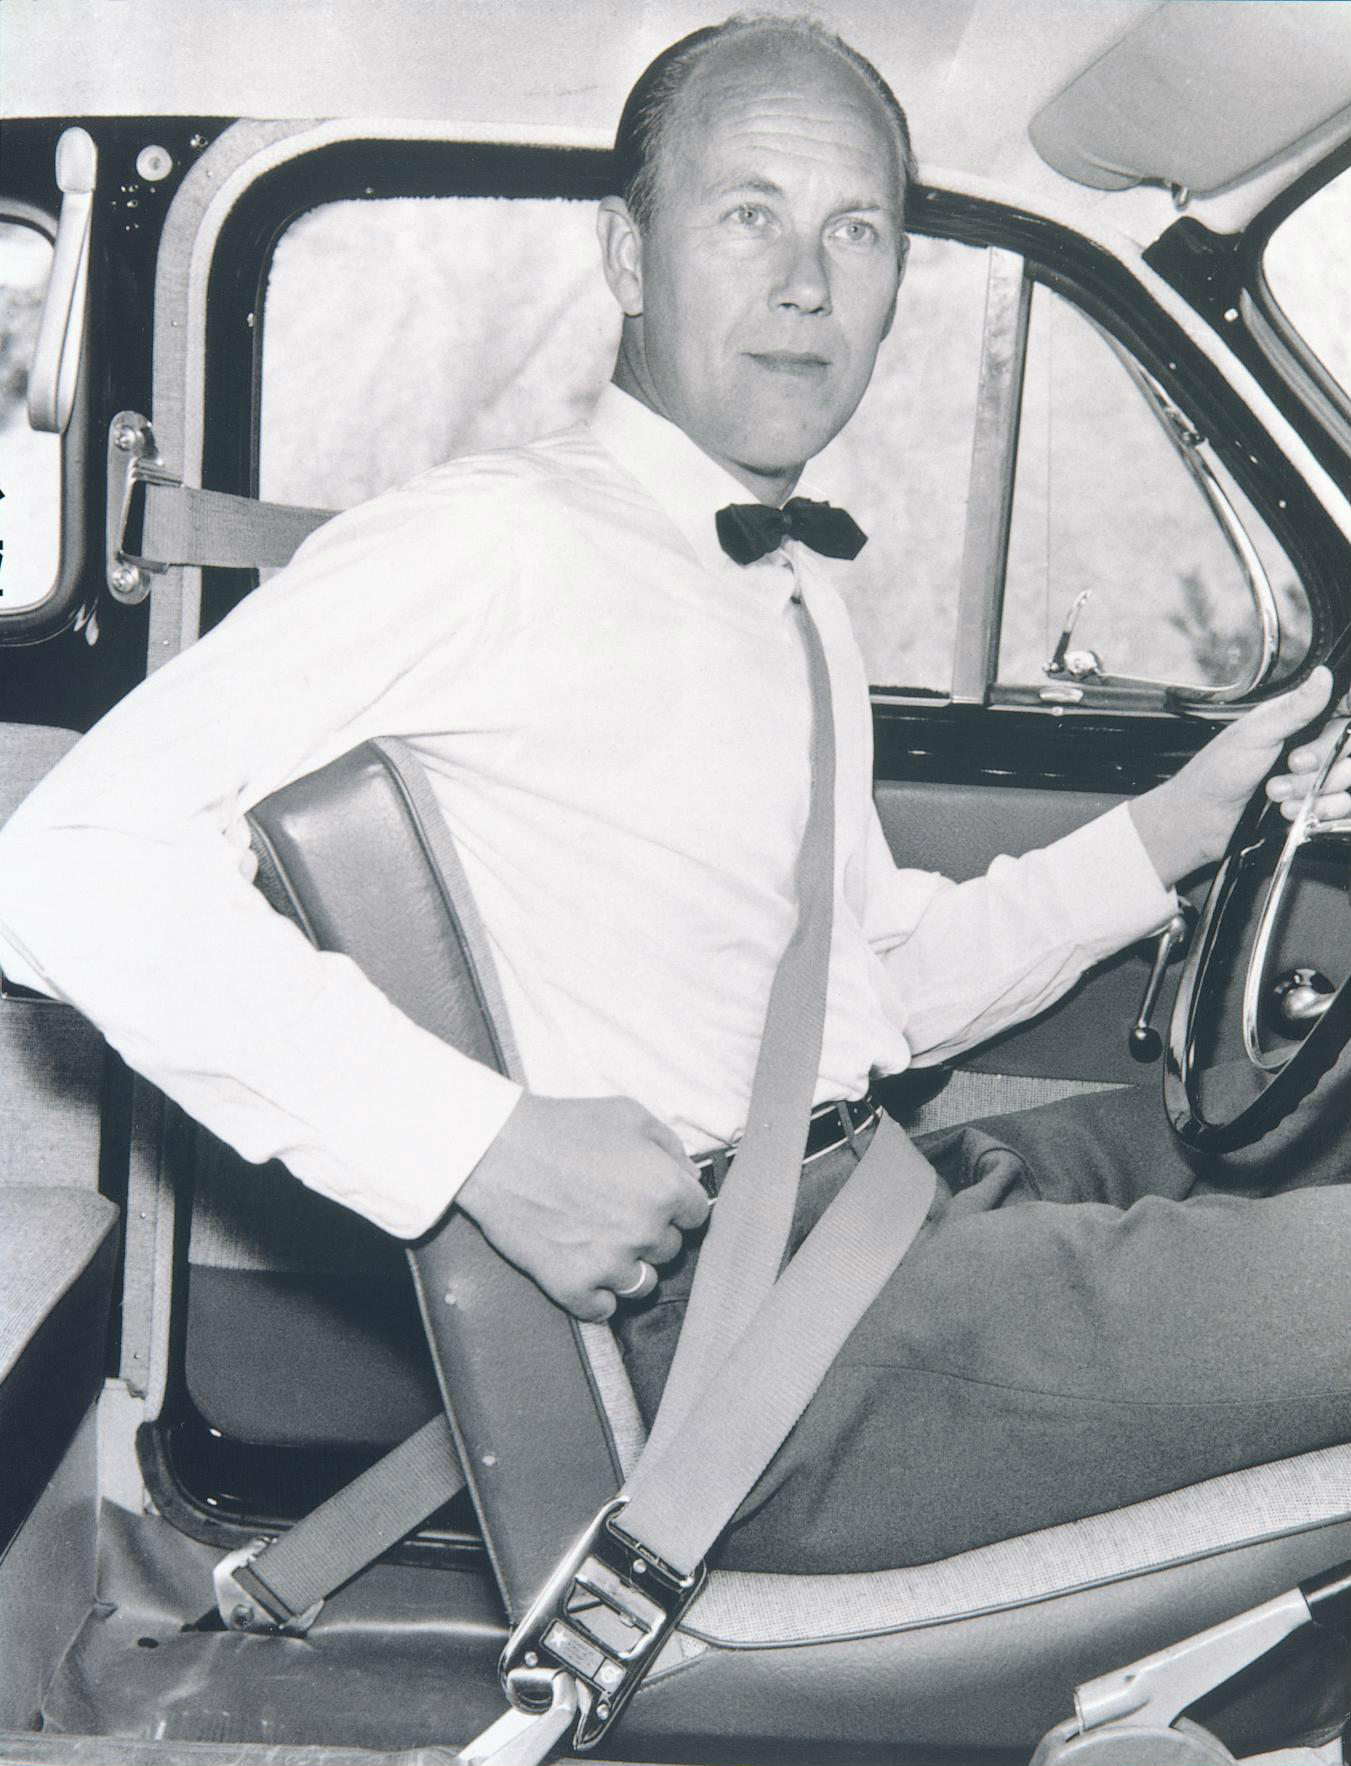 Nils Bohlin invented the three-point seatbelt